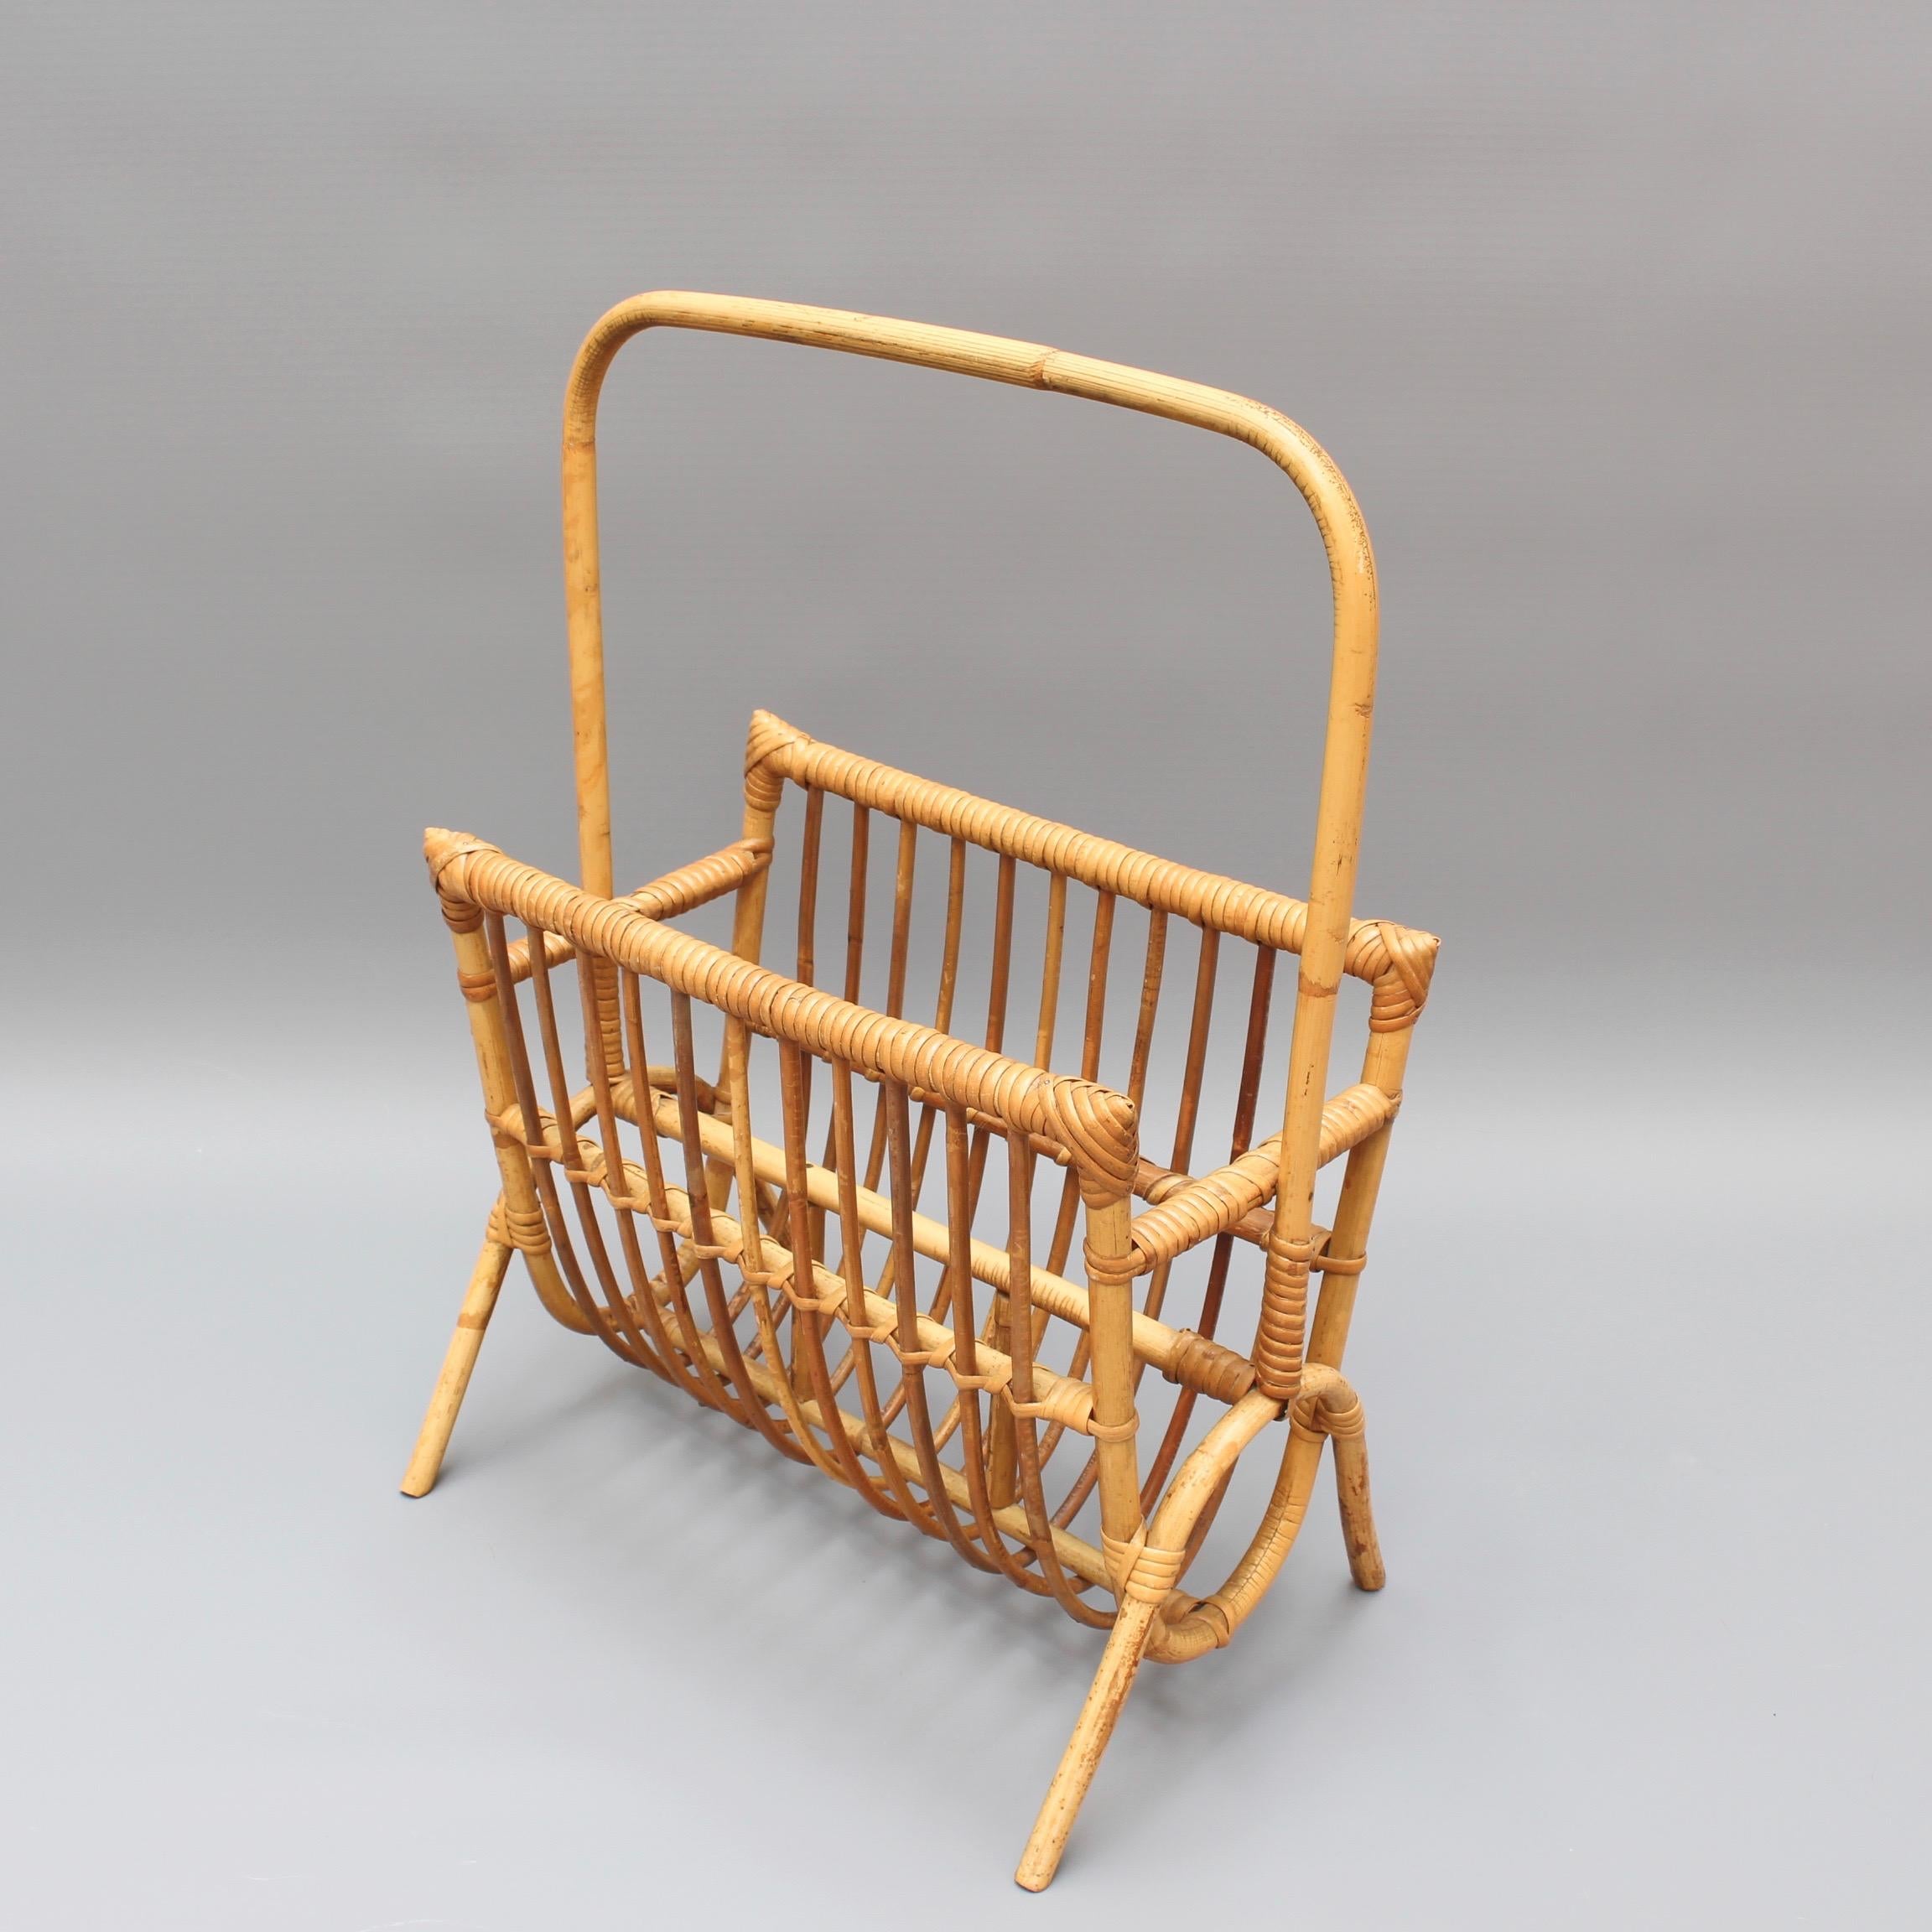 Very sought after French midcentury rattan magazine rack with large handle (circa 1960s). Rattan canes are bound together with rattan strips creating the structure of the rack. Absolutely delightful. In good vintage condition. Commensurate with its